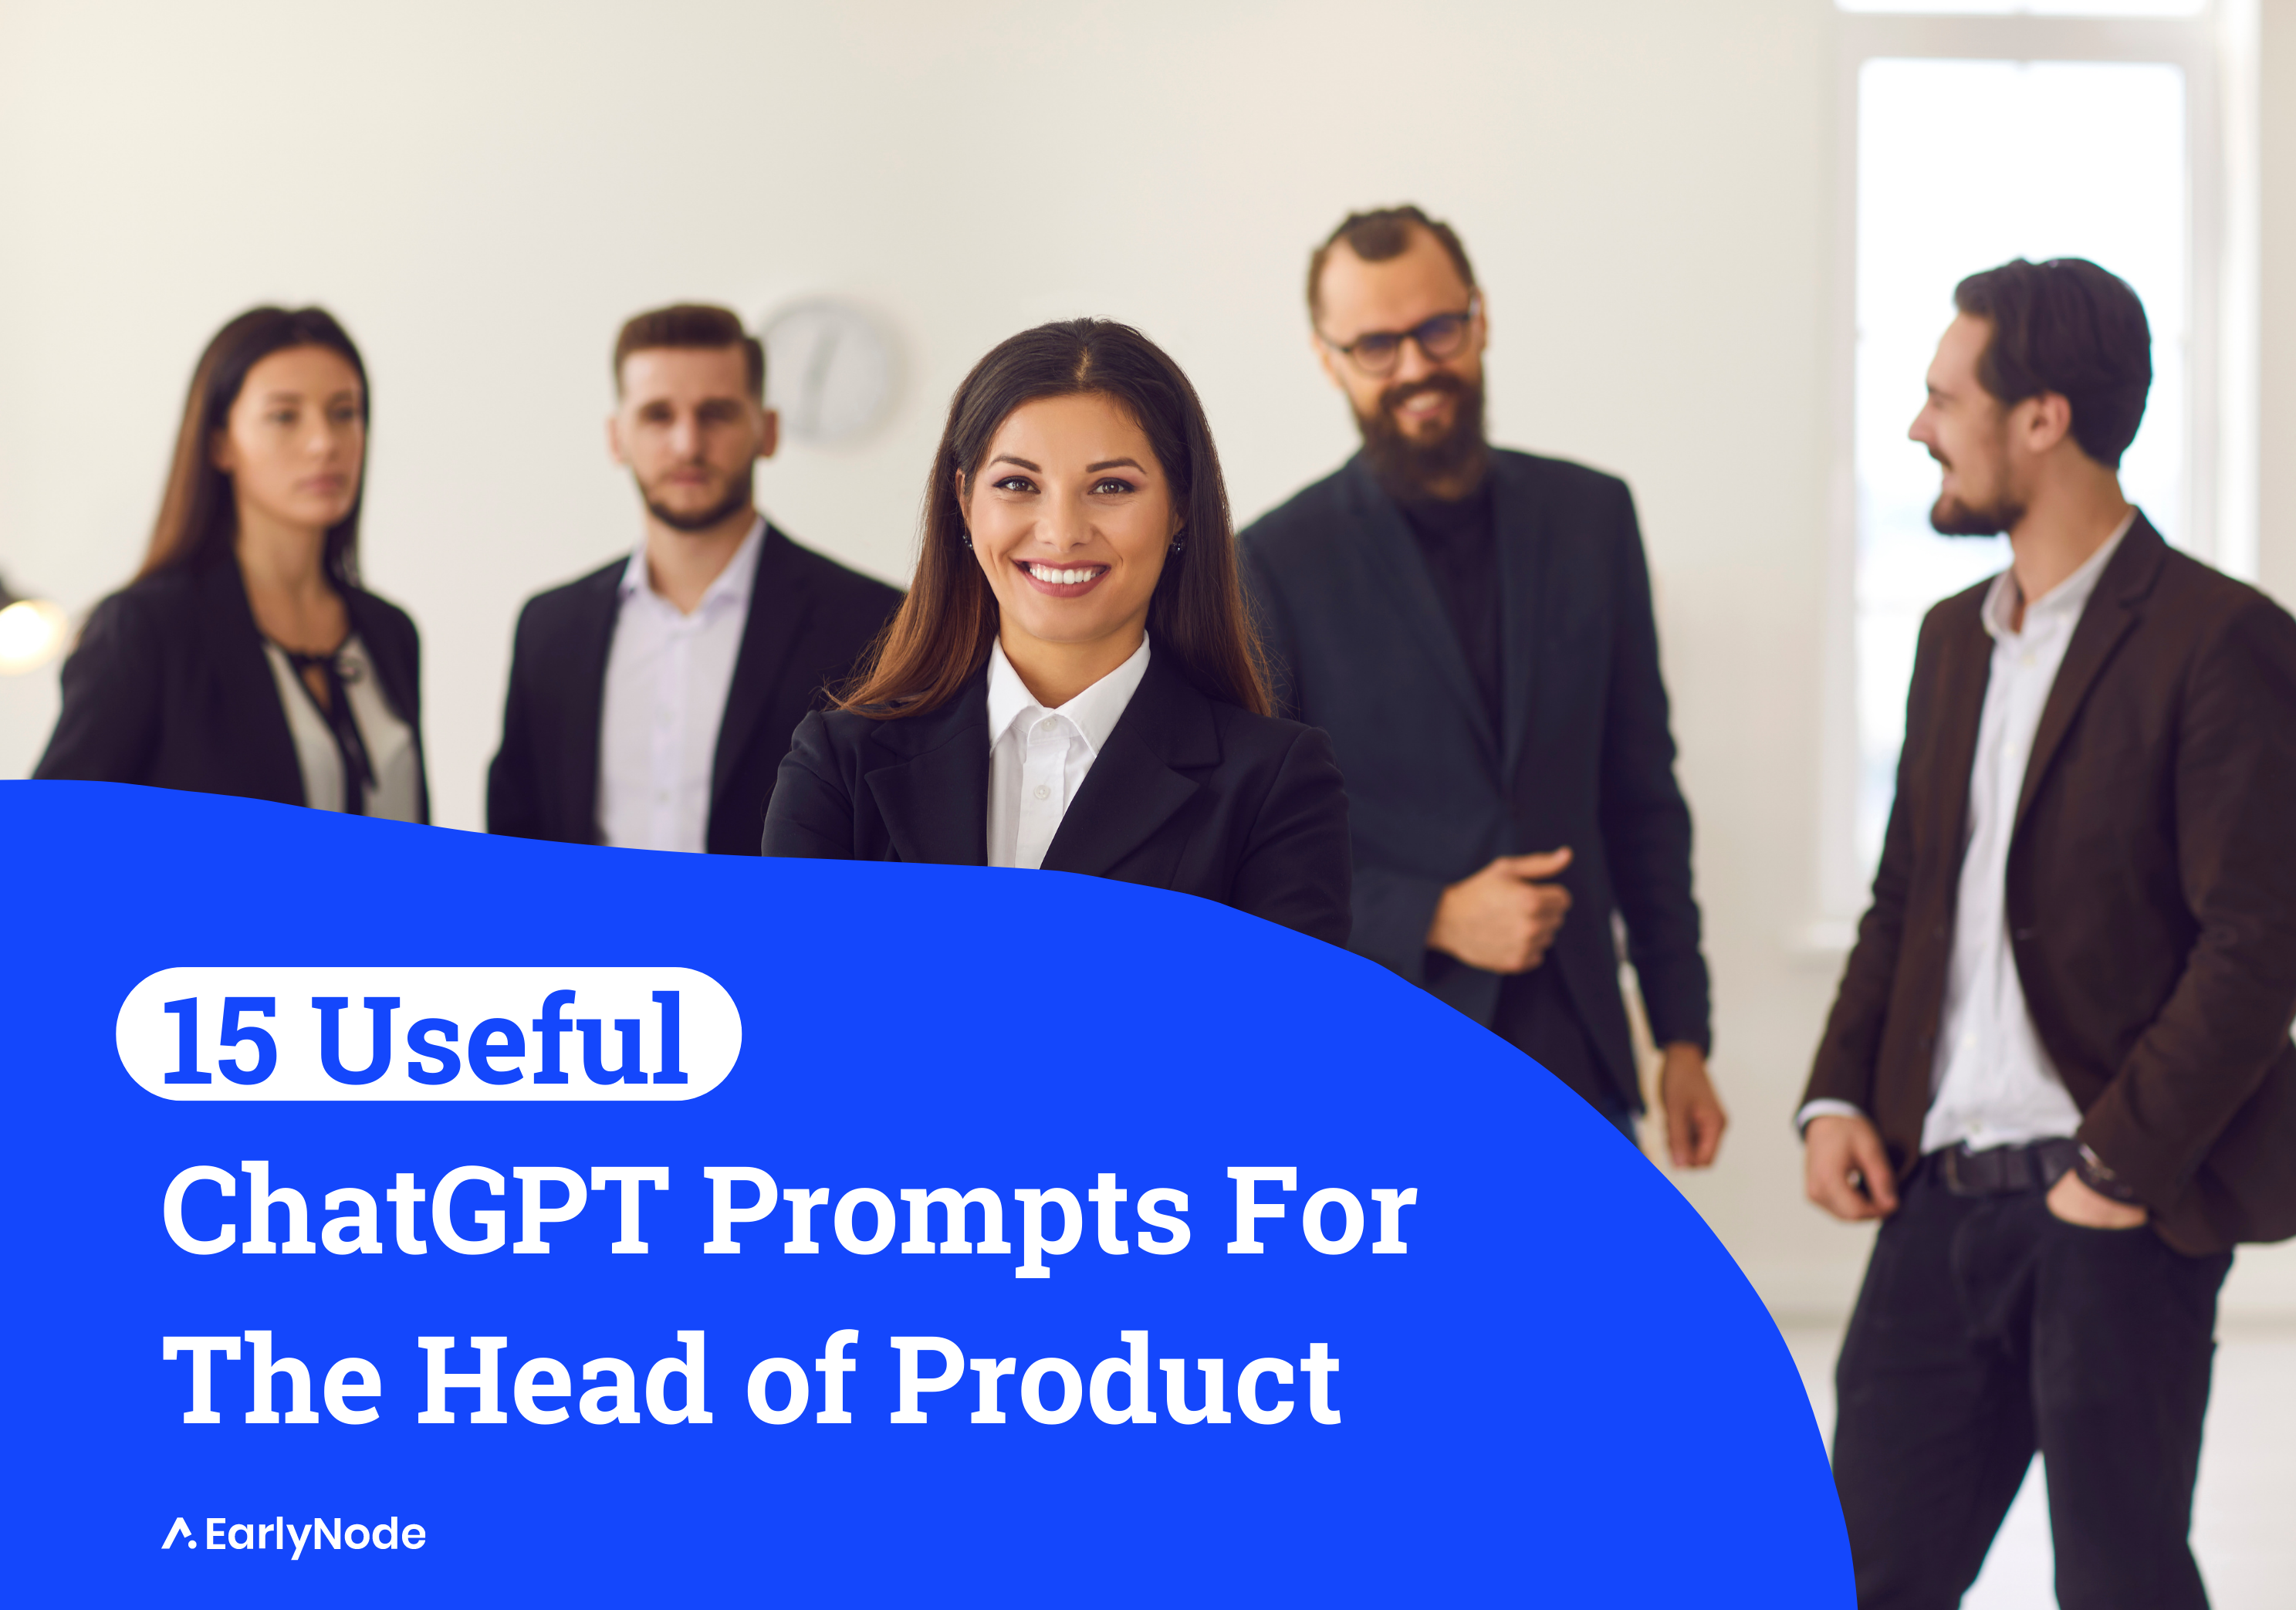 15 ChatGPT Prompts For the Head of Product to Analyze, Manage, and Market